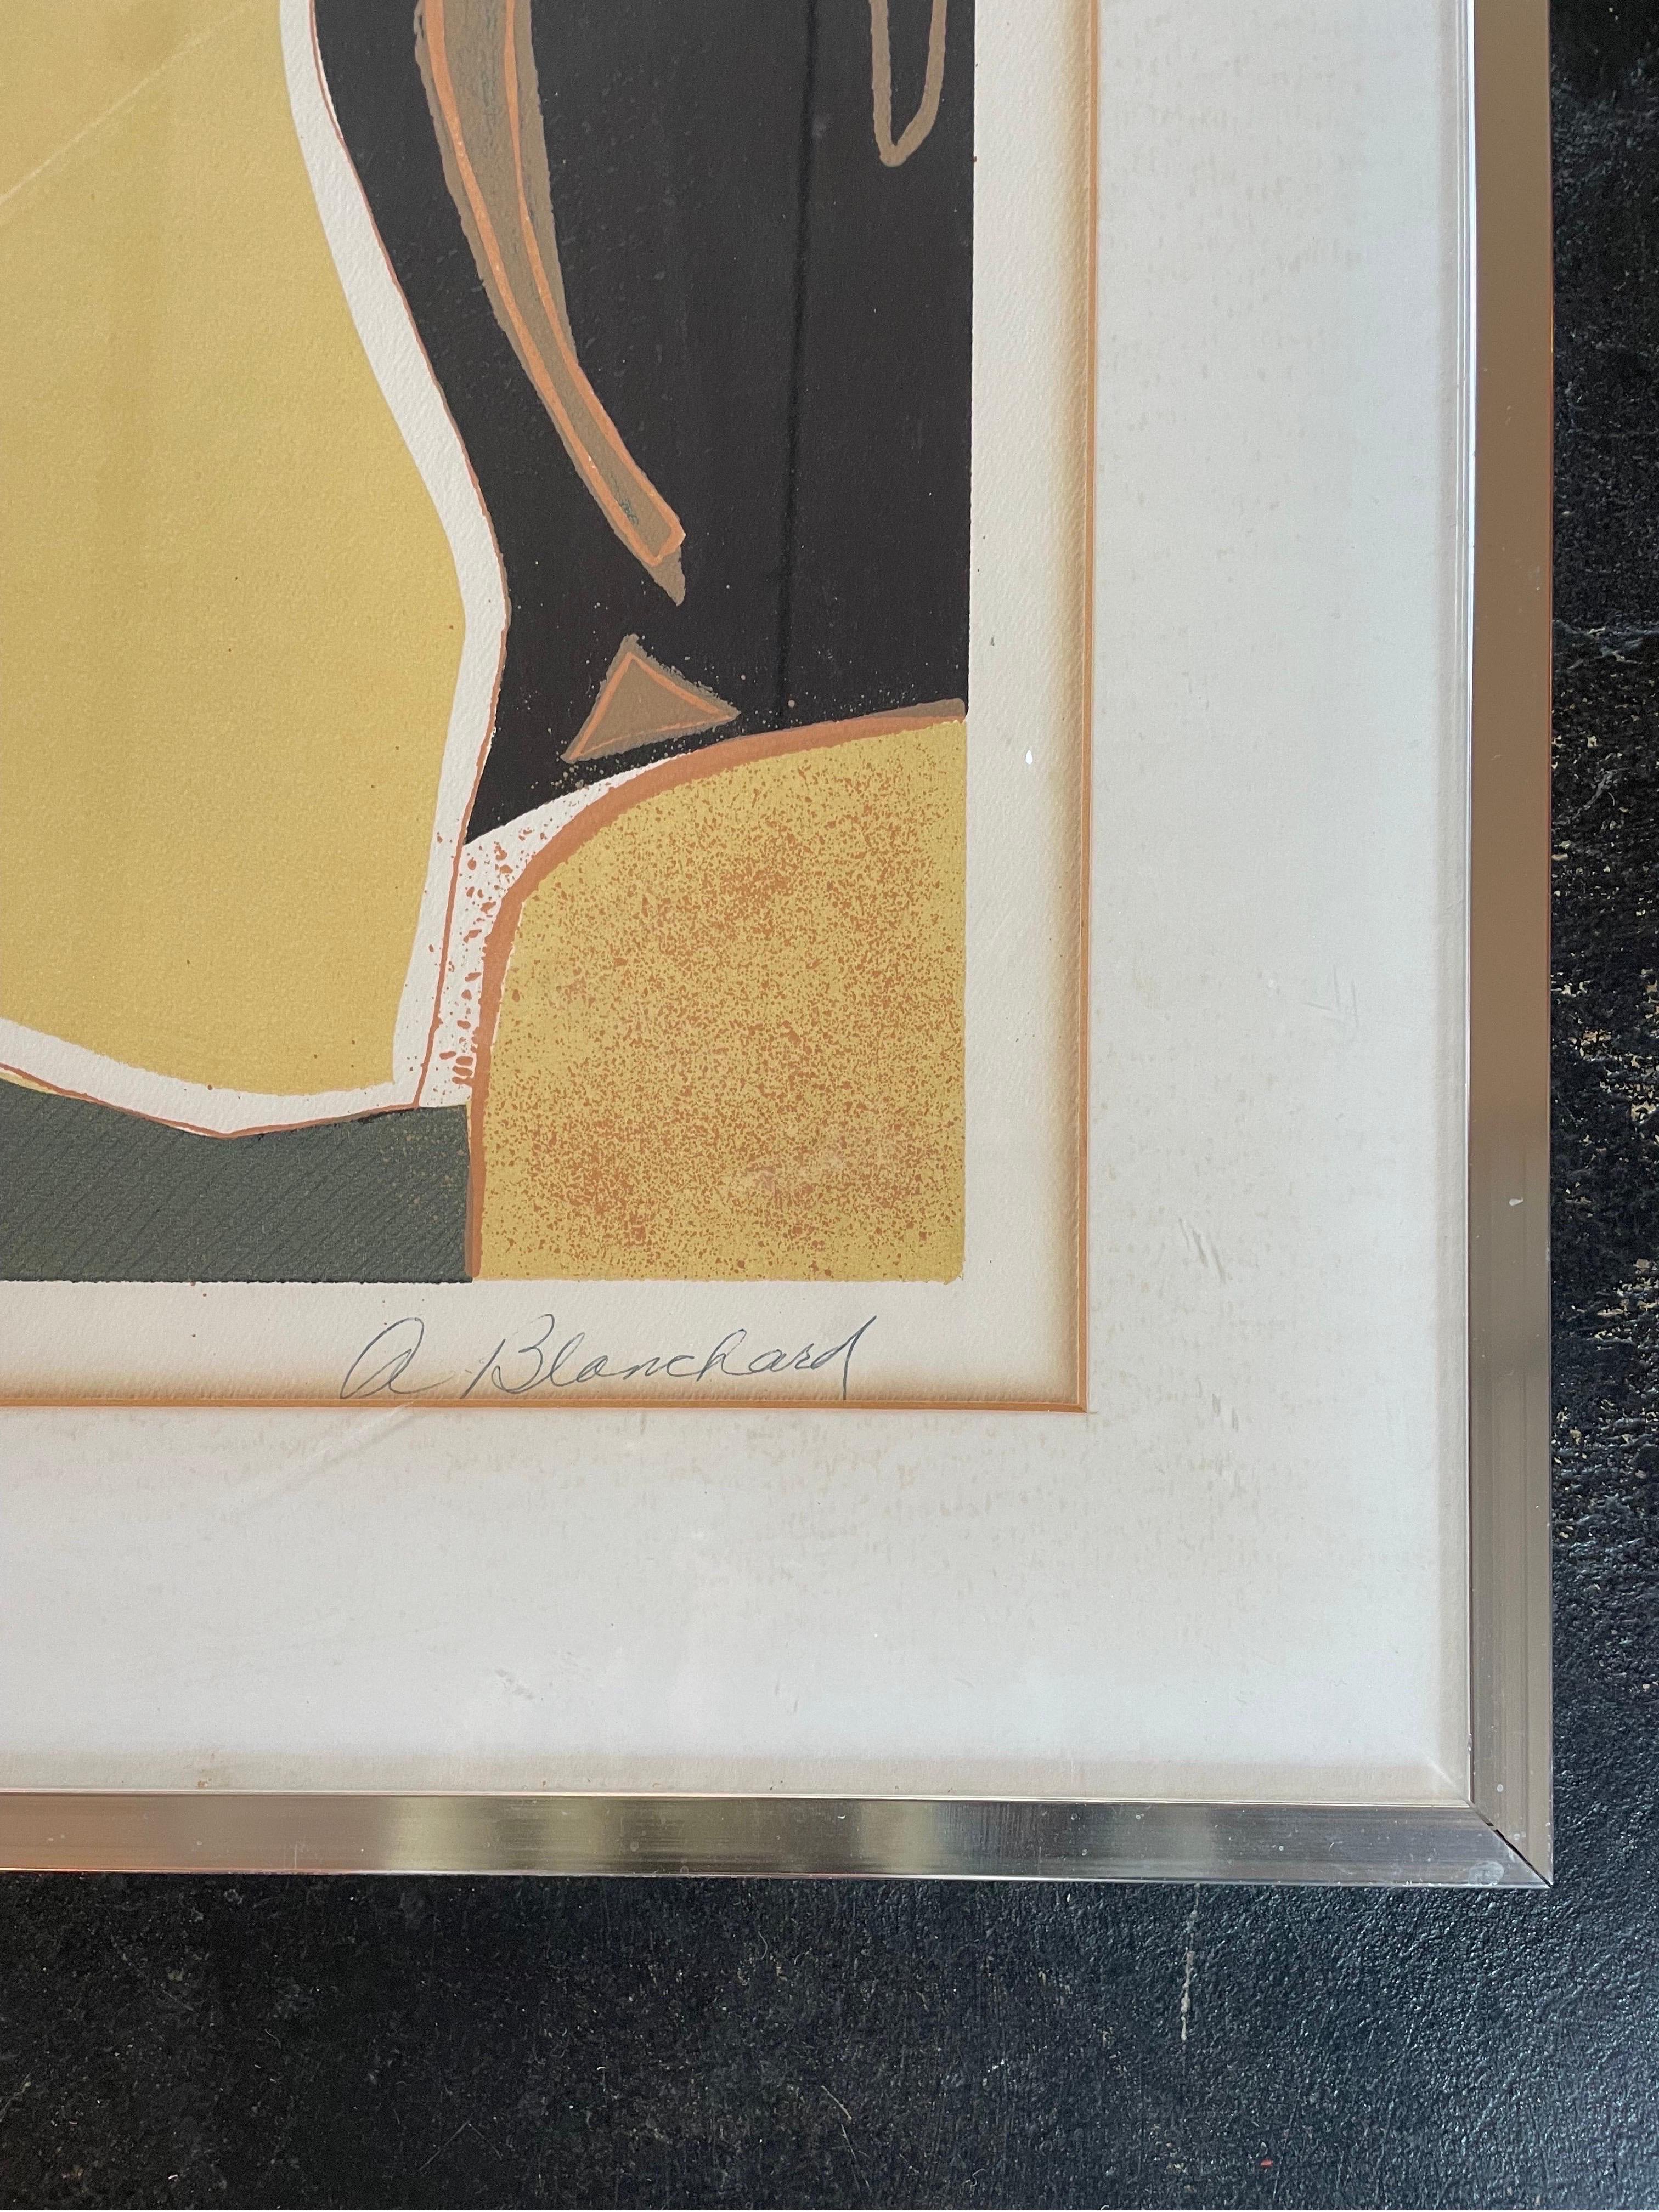 Vintage mid century abstract lithograph signed A. Blanchard. In excellent condition and encased beautifully in a silver frame.